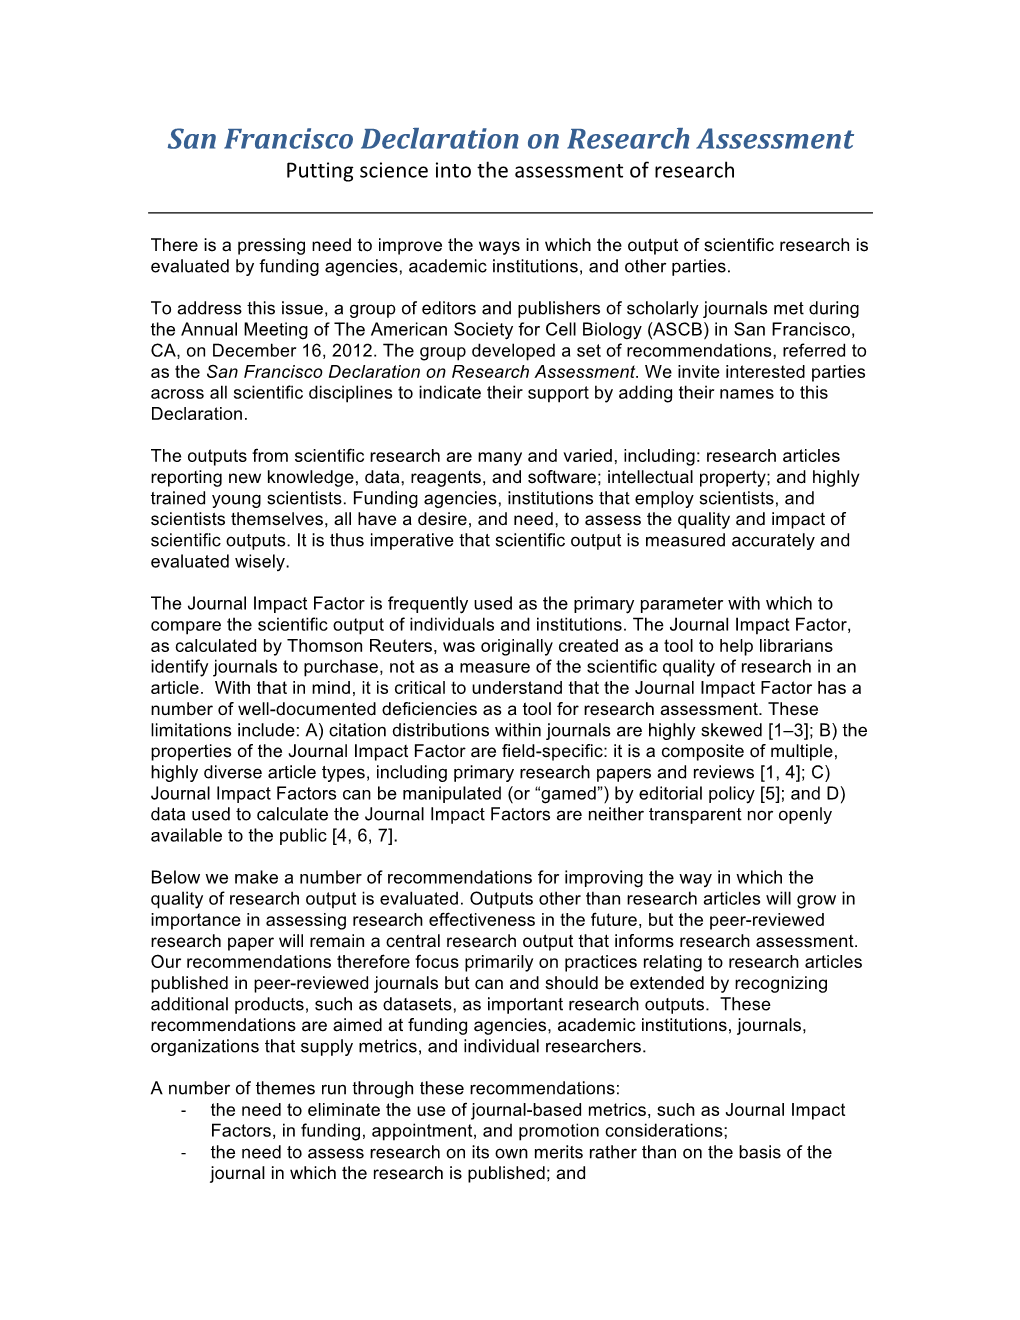 San Francisco Declaration on Research Assessment Putting Science Into the Assessment of Research